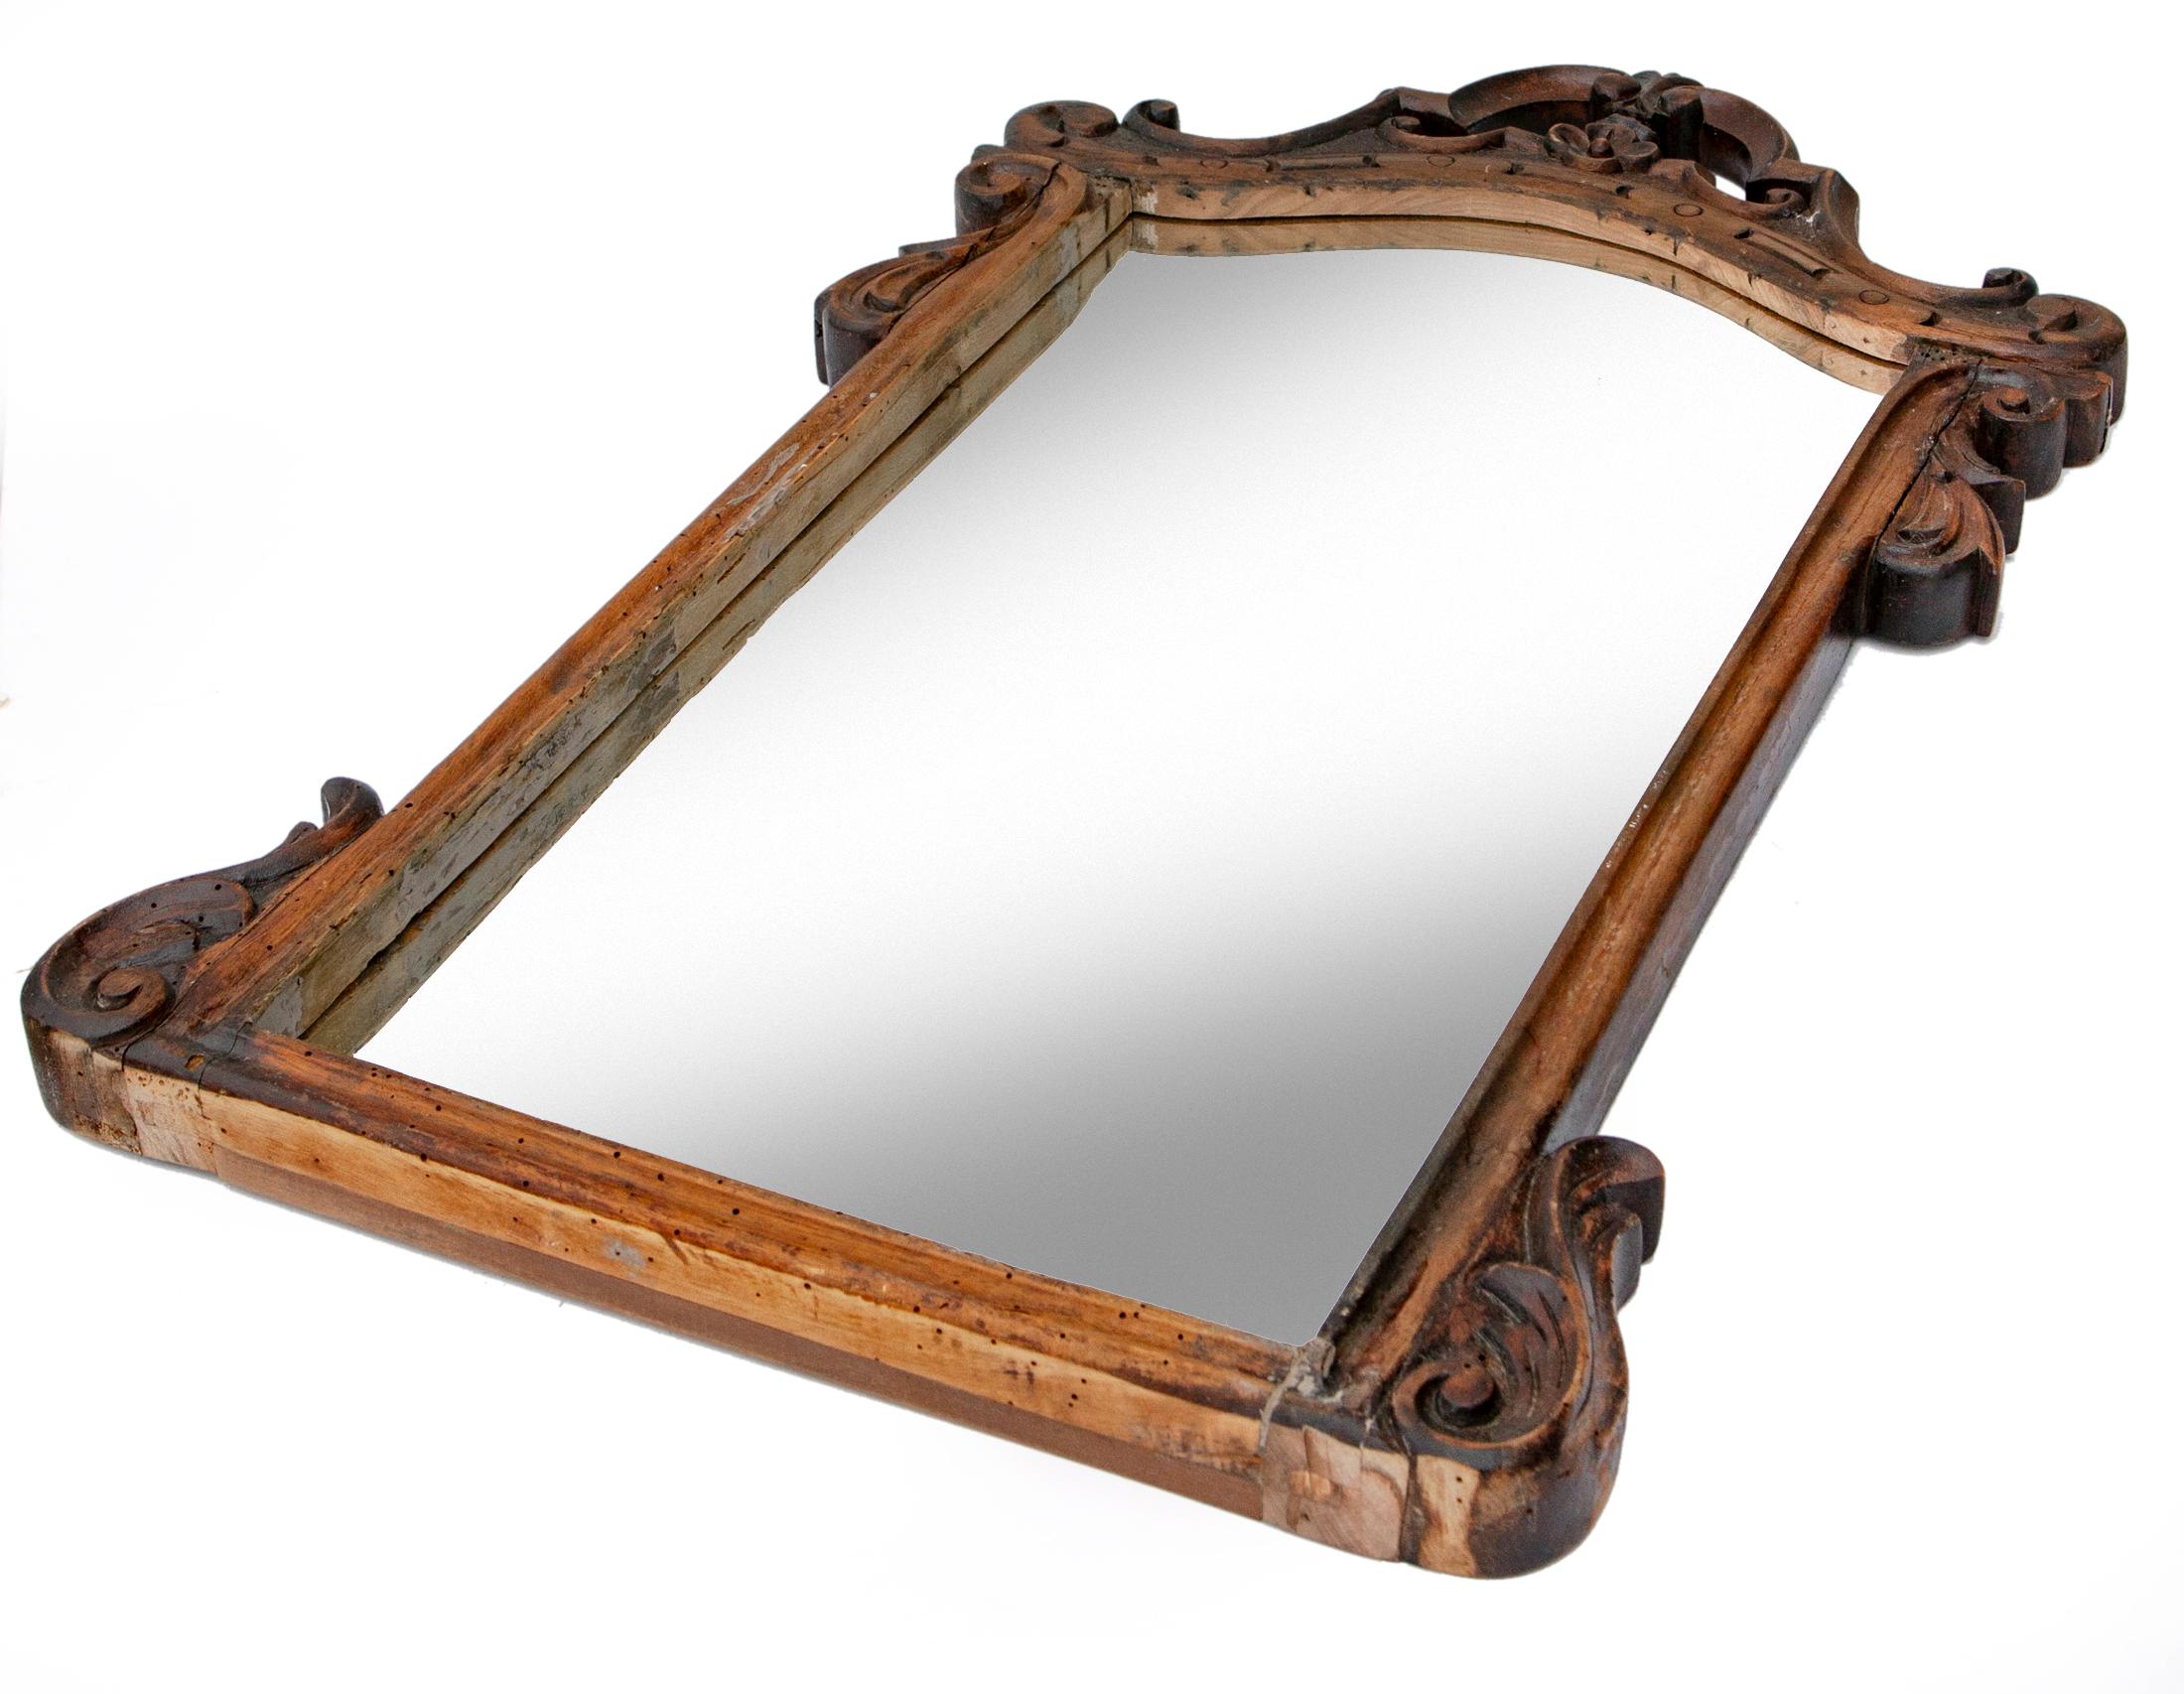 Hand-carved framed mirror has been reimagined from a walnut chairback.
The original fabric cushion has been replaced with a mirror.
The frame is solid, designed with baroque style during the Victorian period.
The carving is well executed with rich